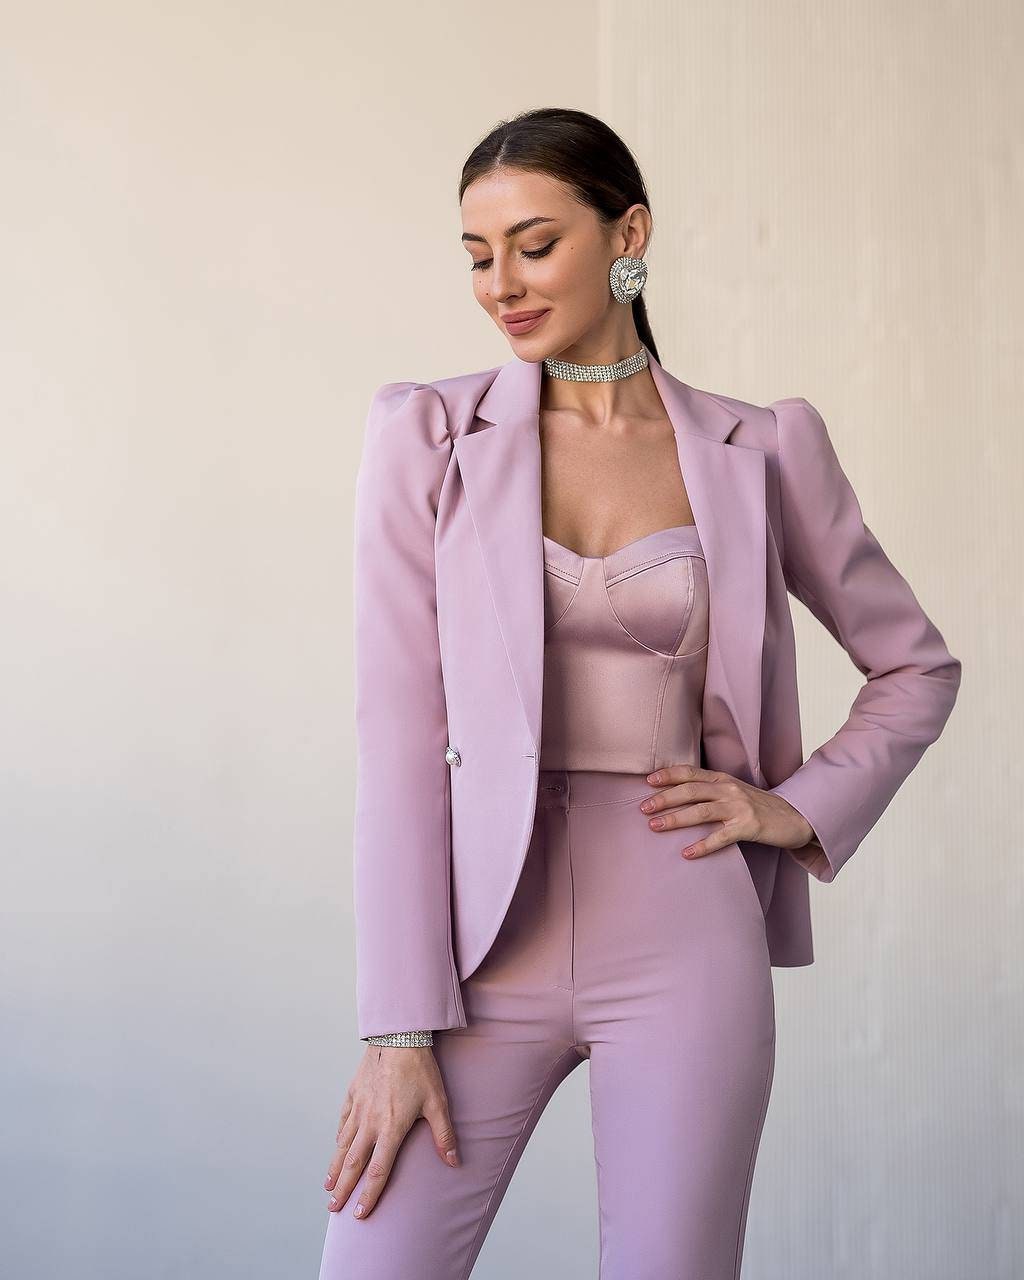 Dusty Pink Flared Pants Suit With Blazer Padded Shoulders - Etsy